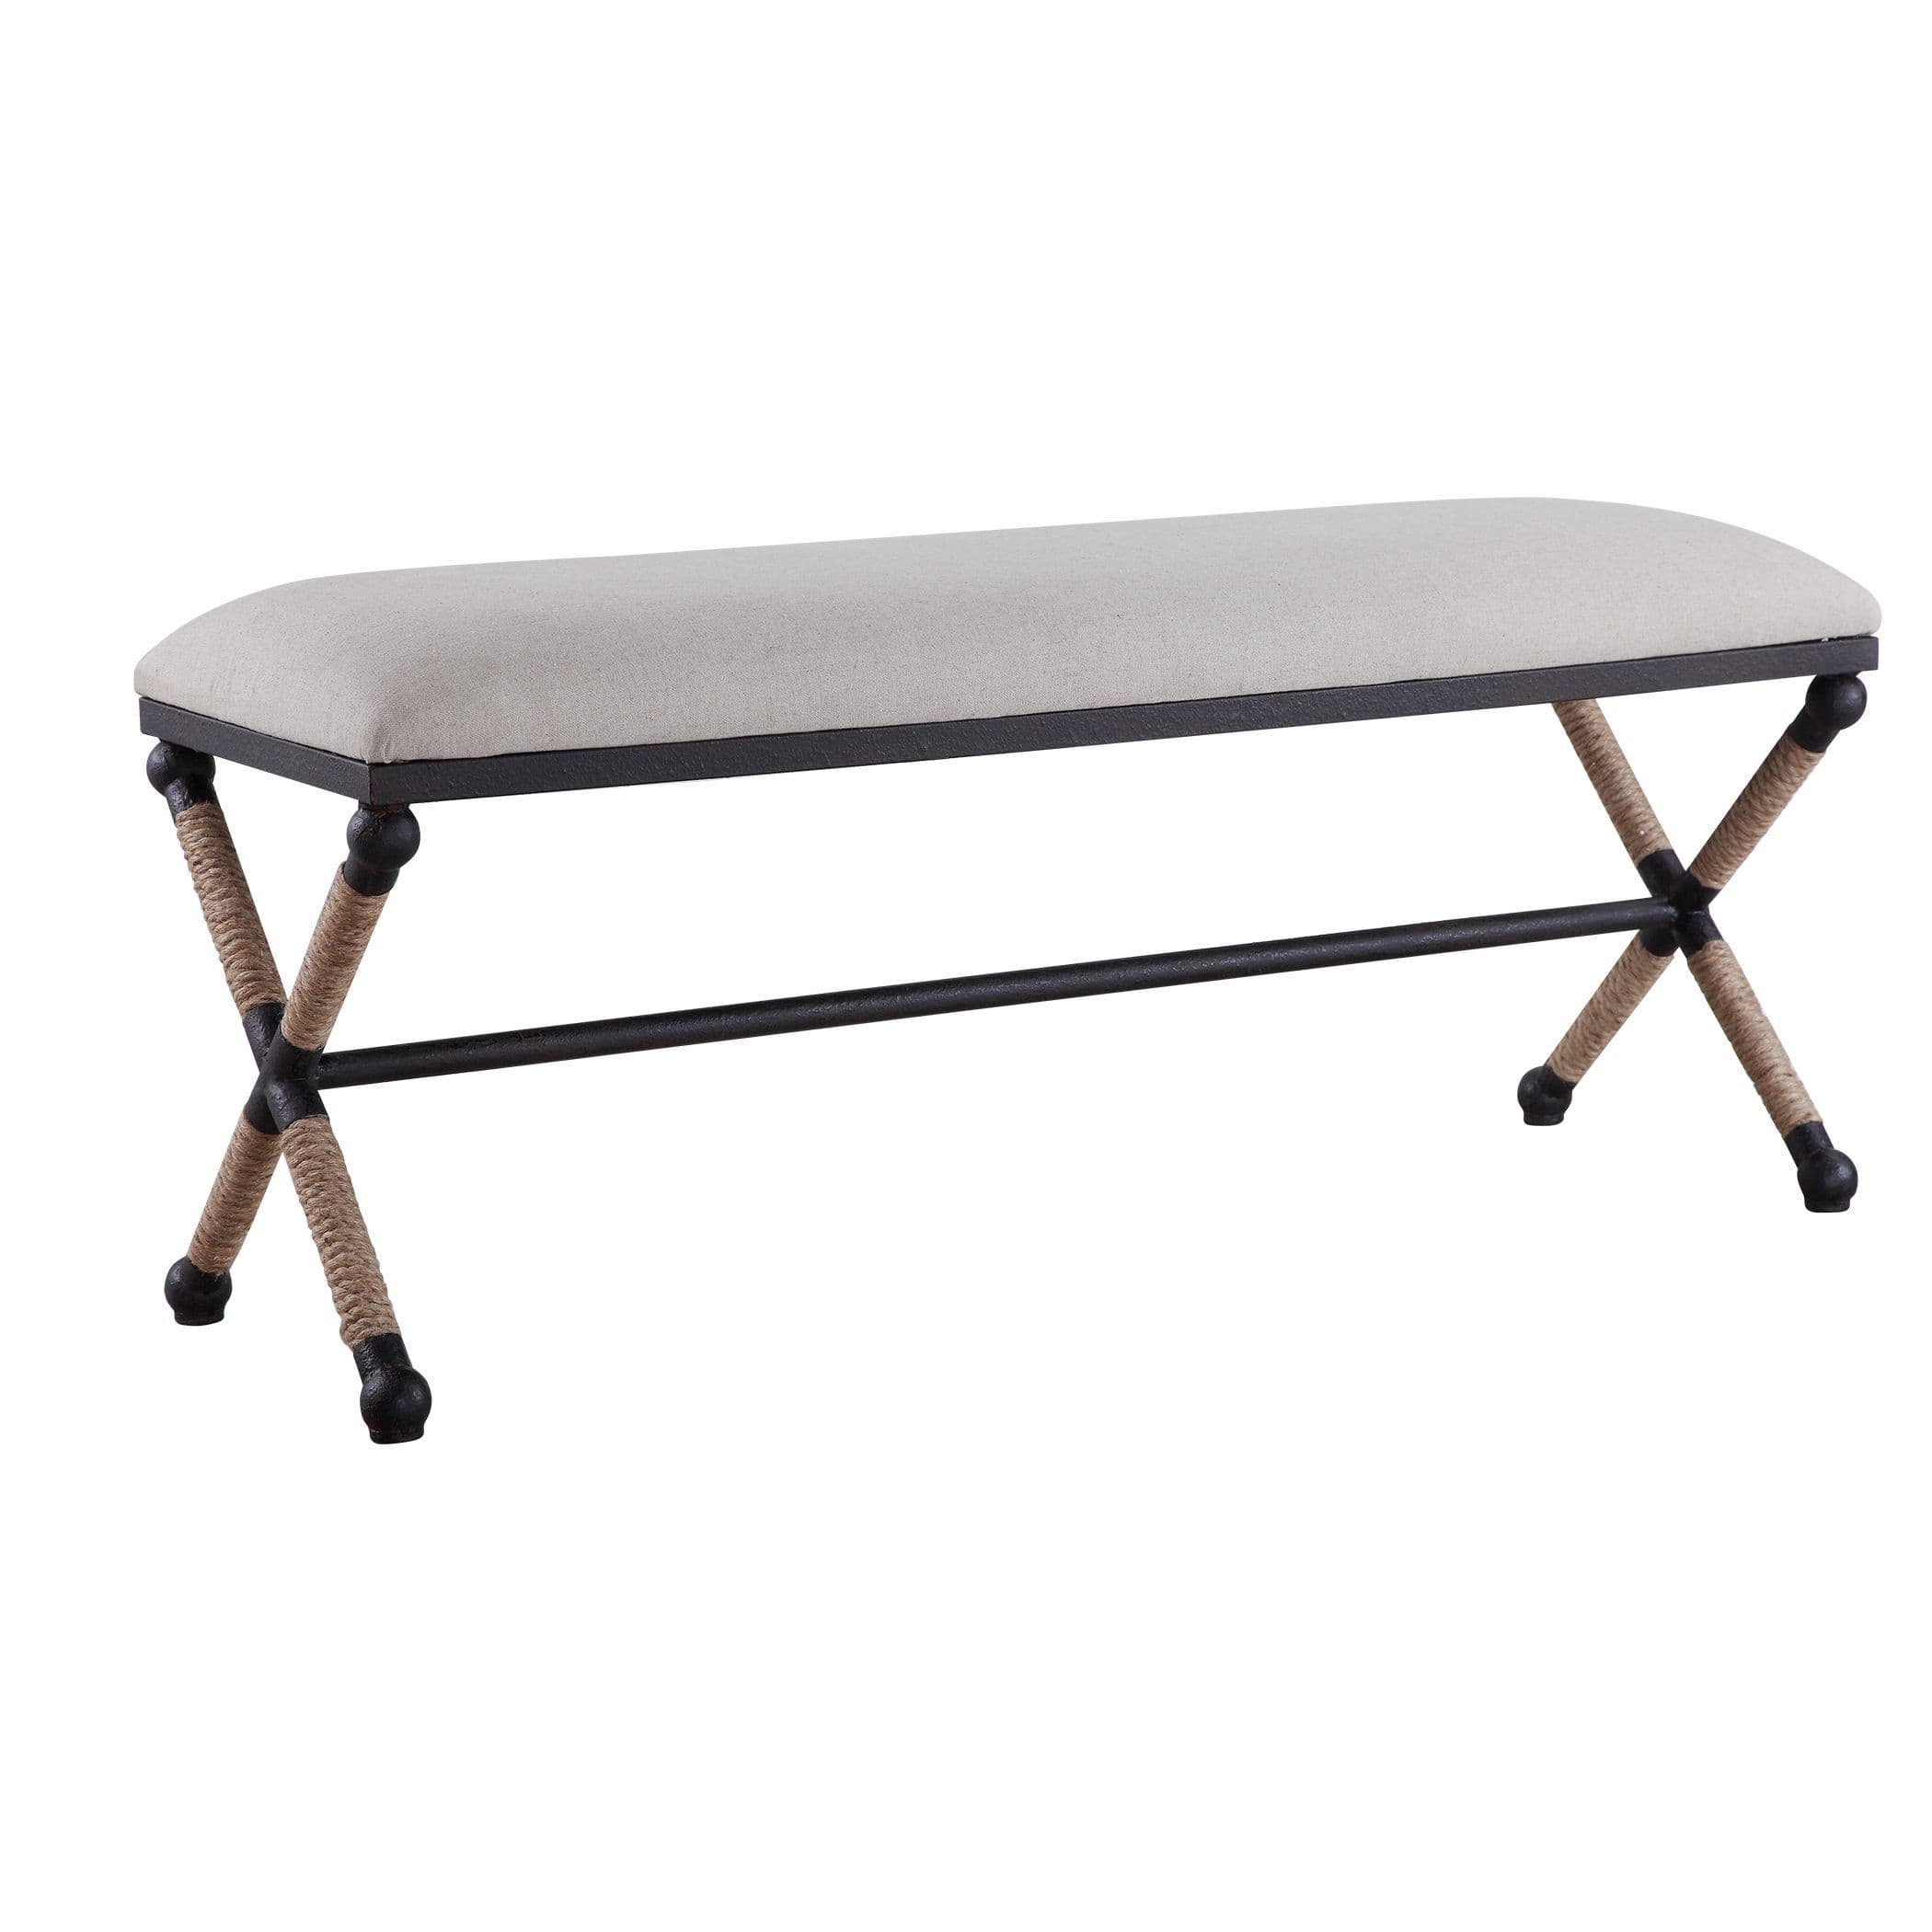 Firth Long White Bench Uttermost